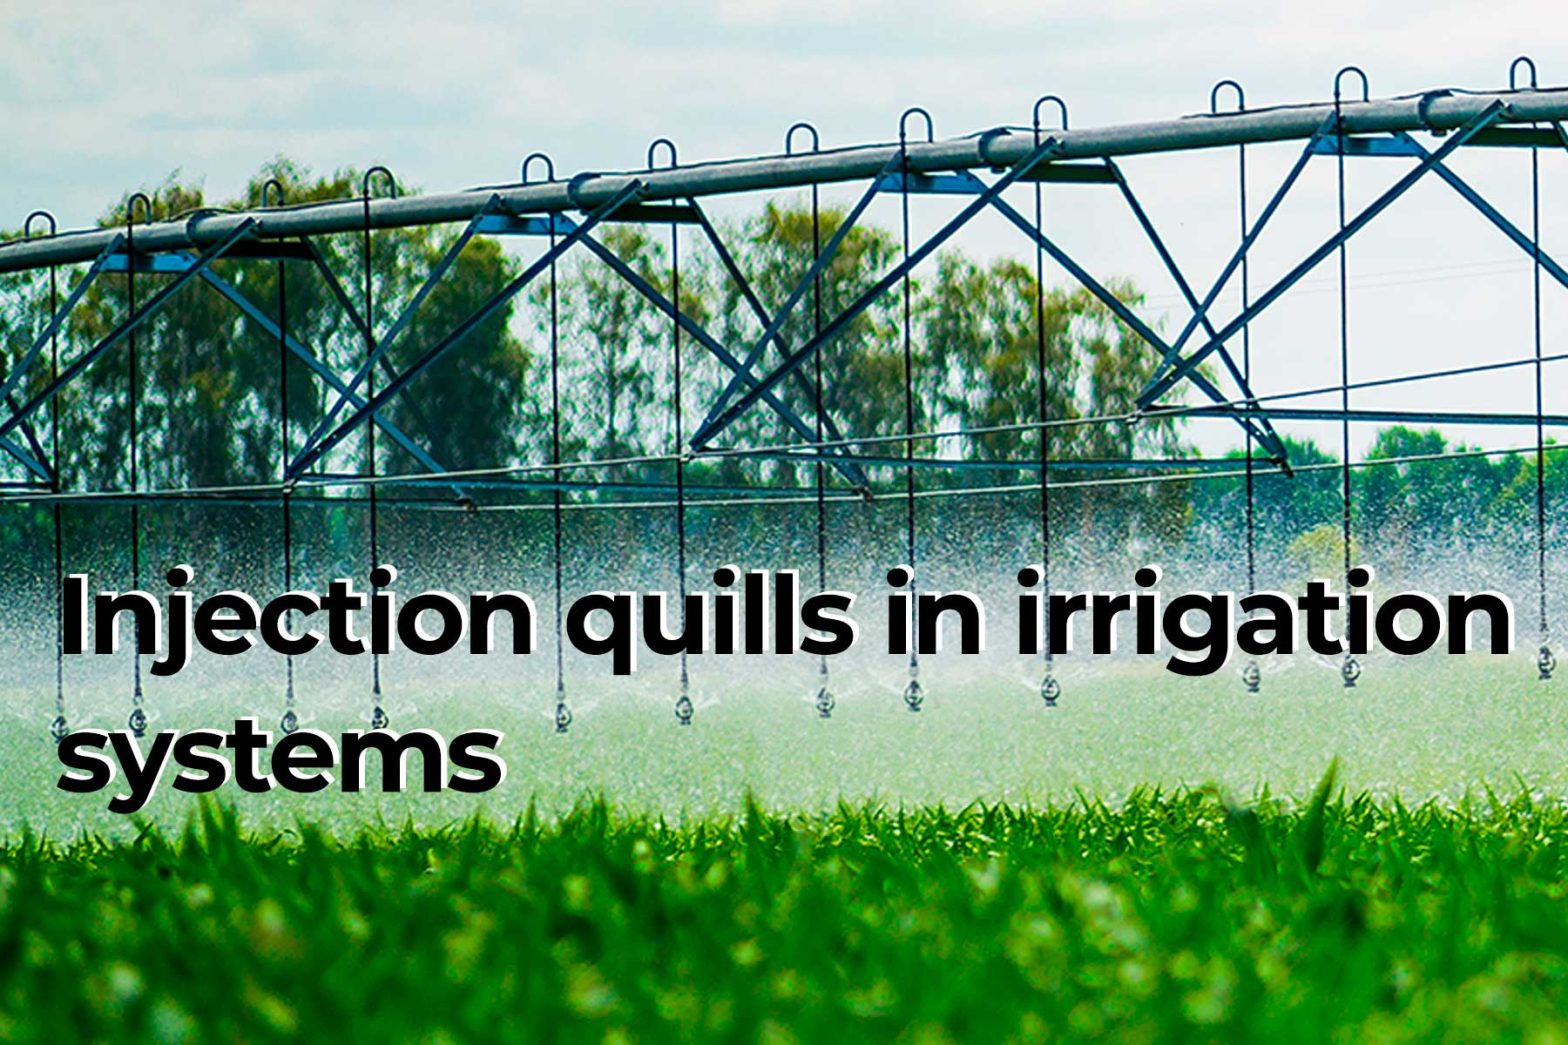 Future of injection quills in irrigation systems